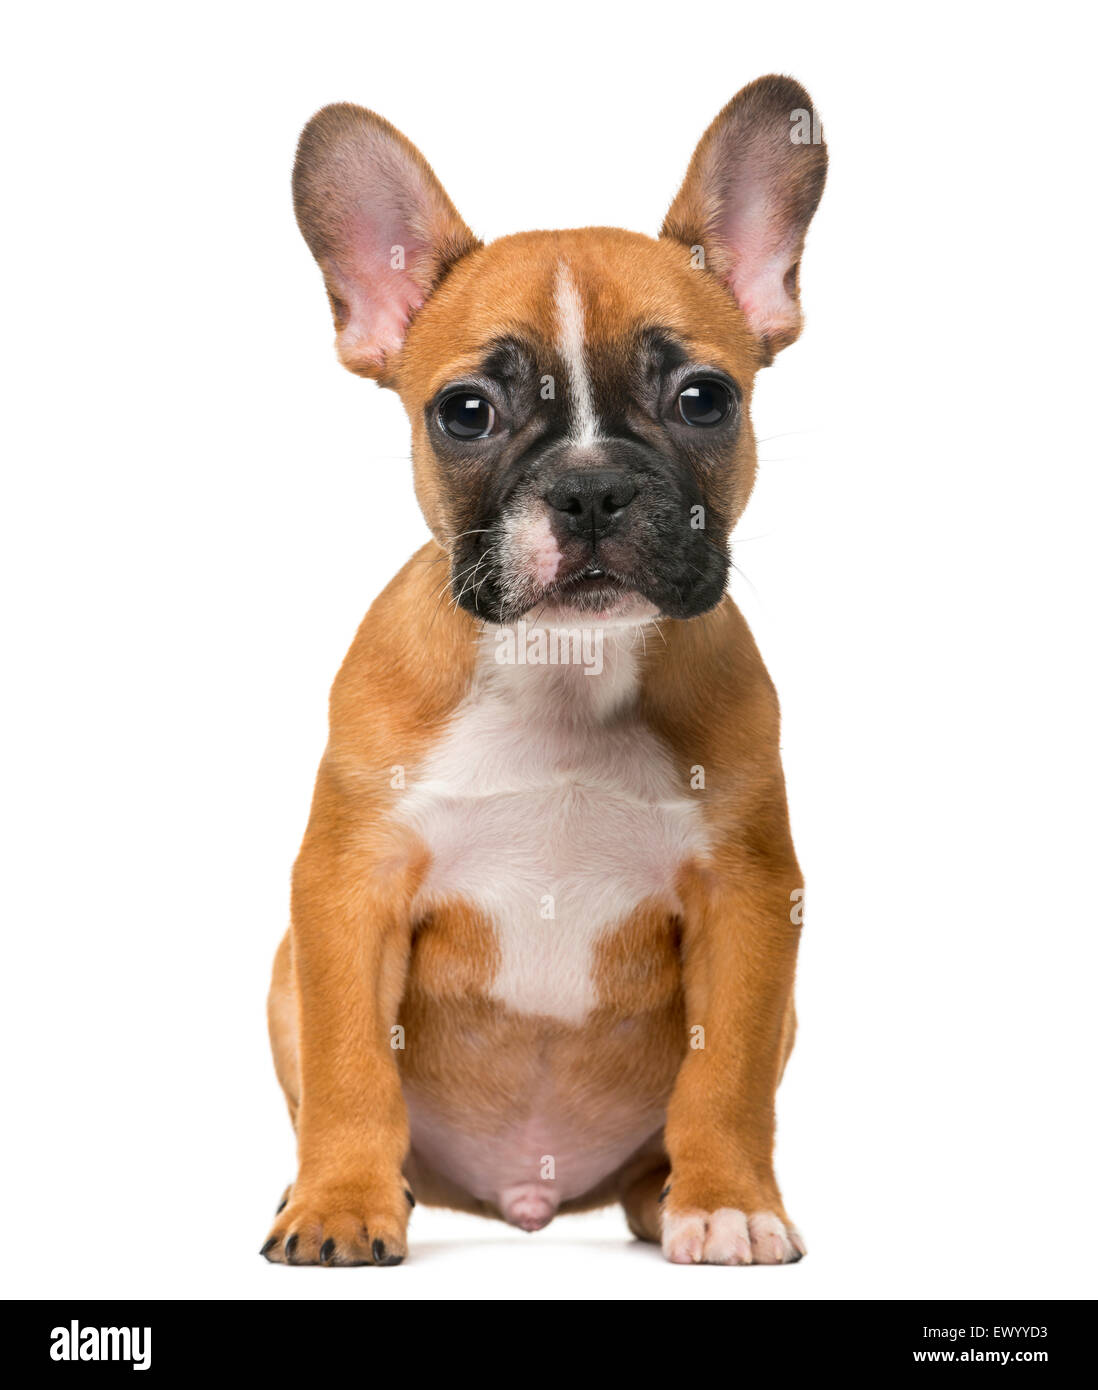 French Bulldog puppy in front of white background Stock Photo